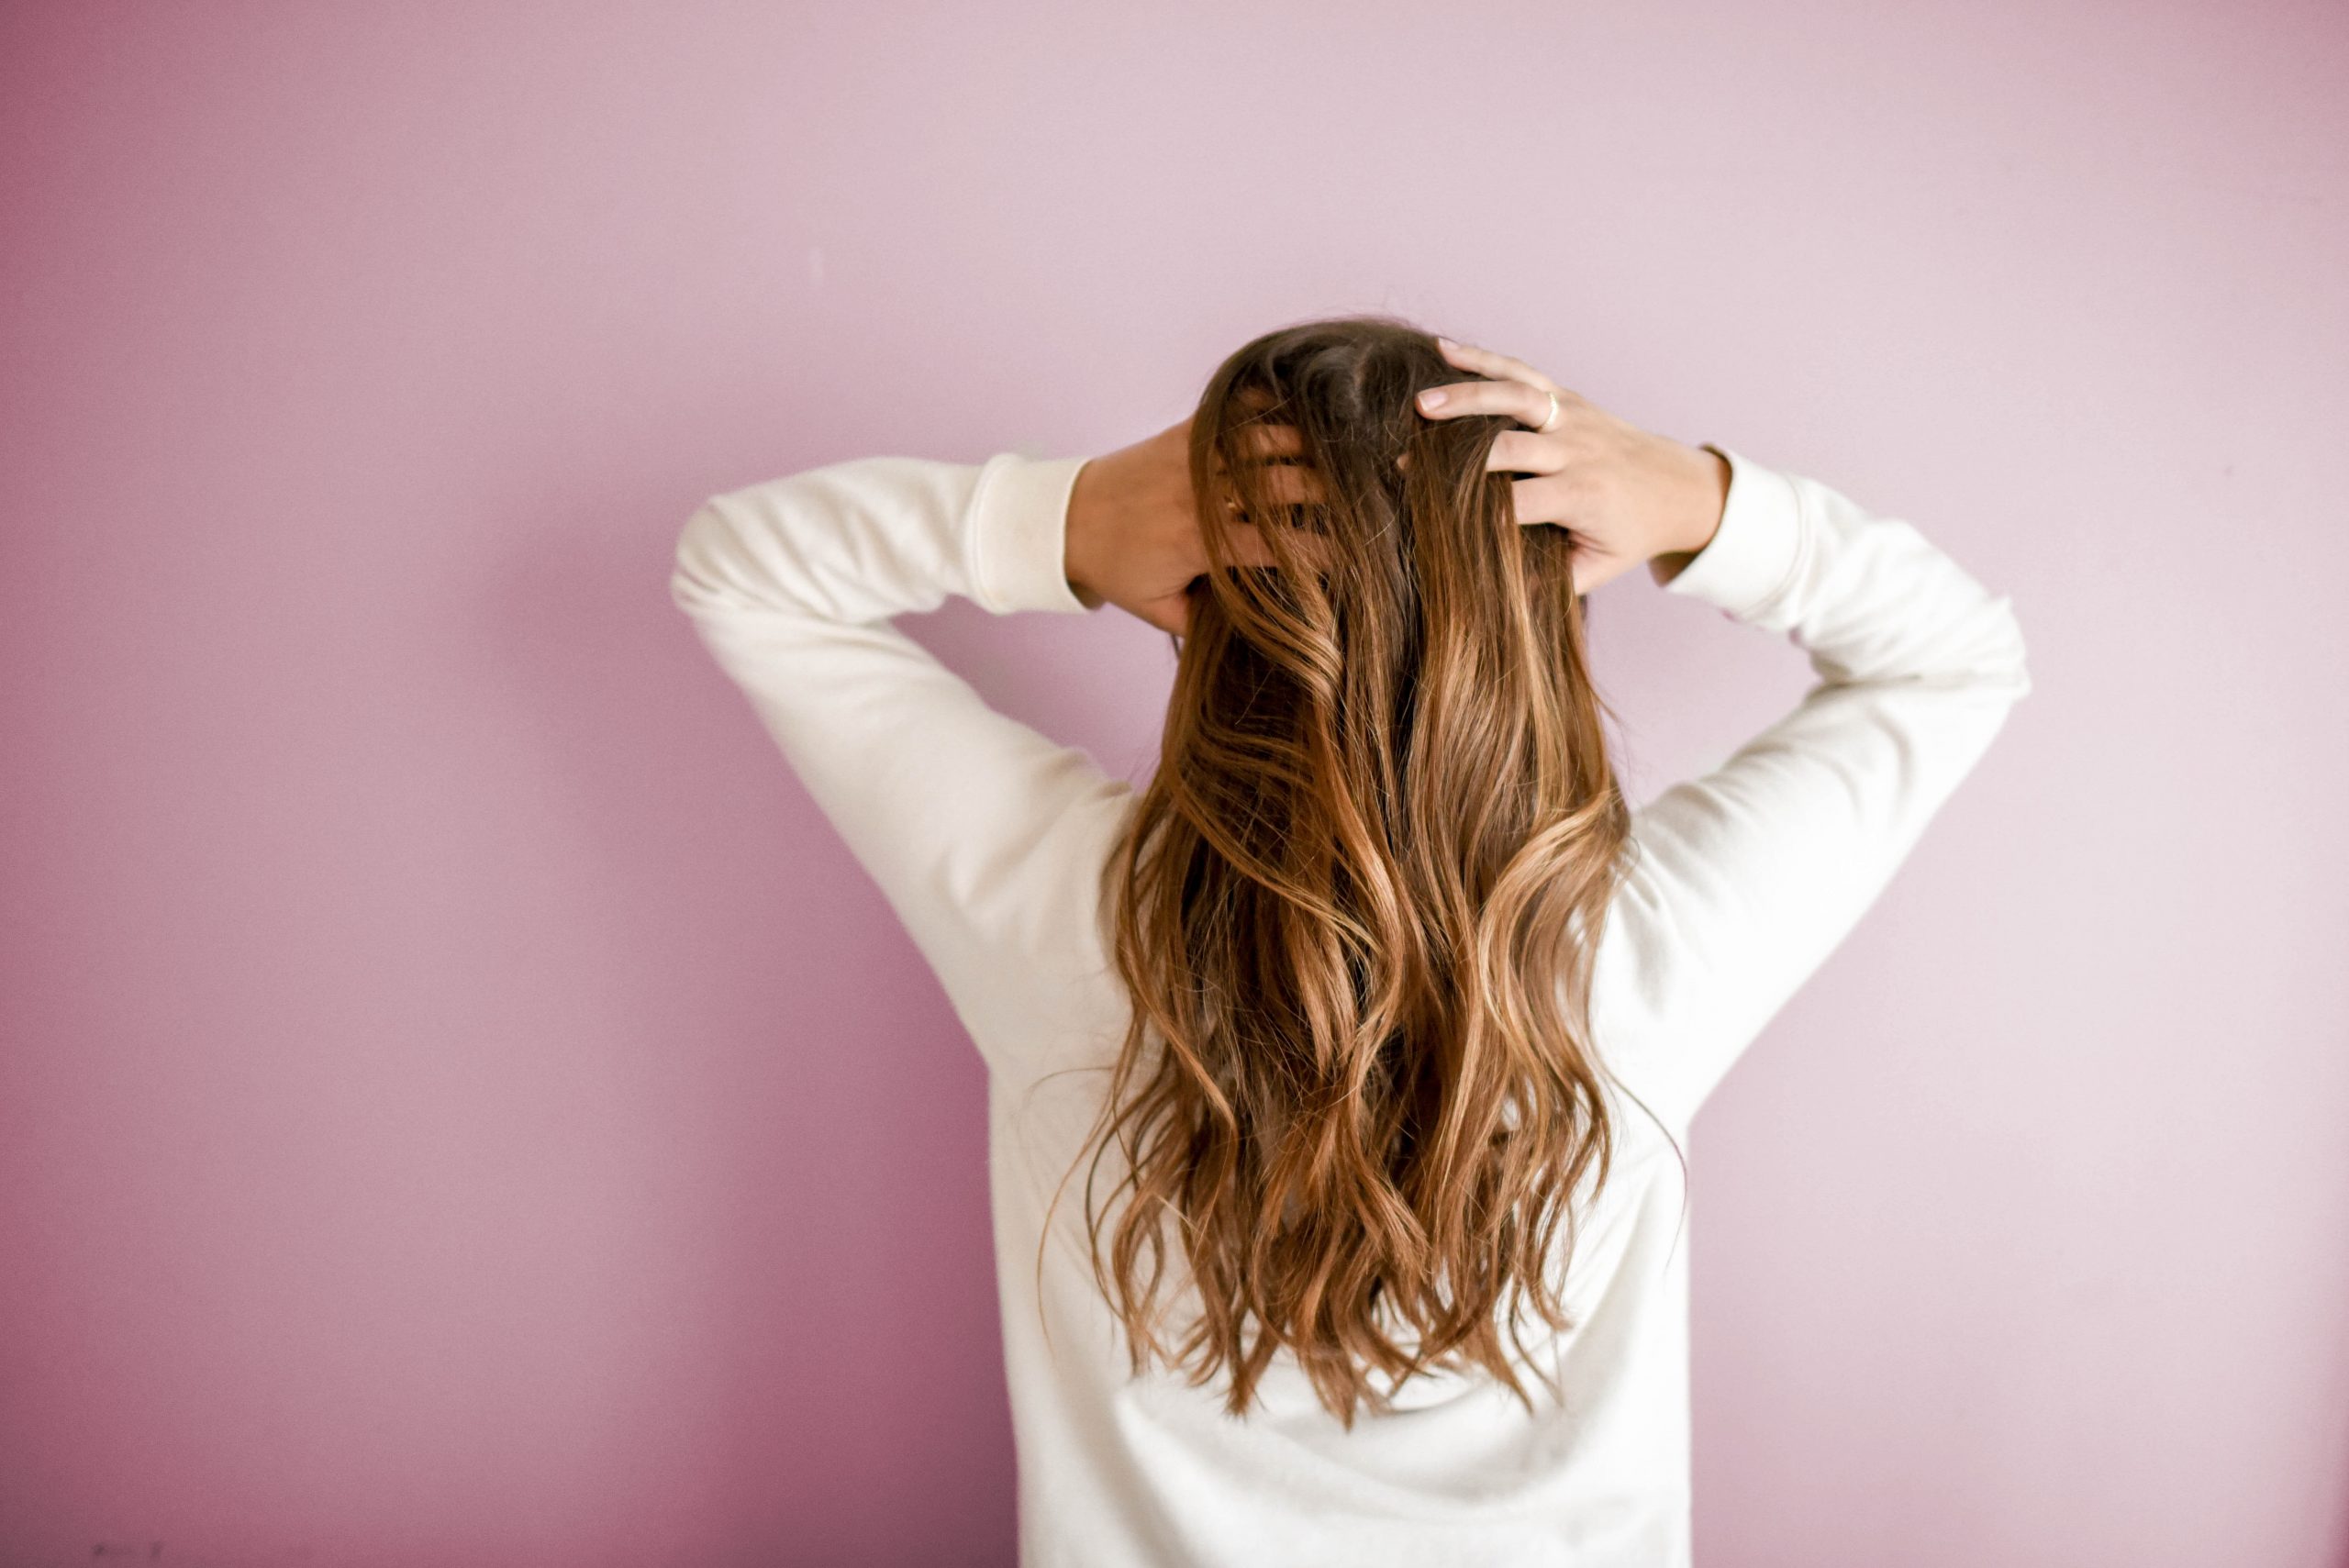 Hair breakage occurs when the internal shaft of a strand of hair breaks. This usually happens near the end of the hair strand and is referred to as a split end.  Of course, your hair can break anywhere and cause issues. The main difference between hair breakage and hair loss is that hair loss involves the hair coming out from the root, hair breakage is when it breaks at any other point on the strand. 